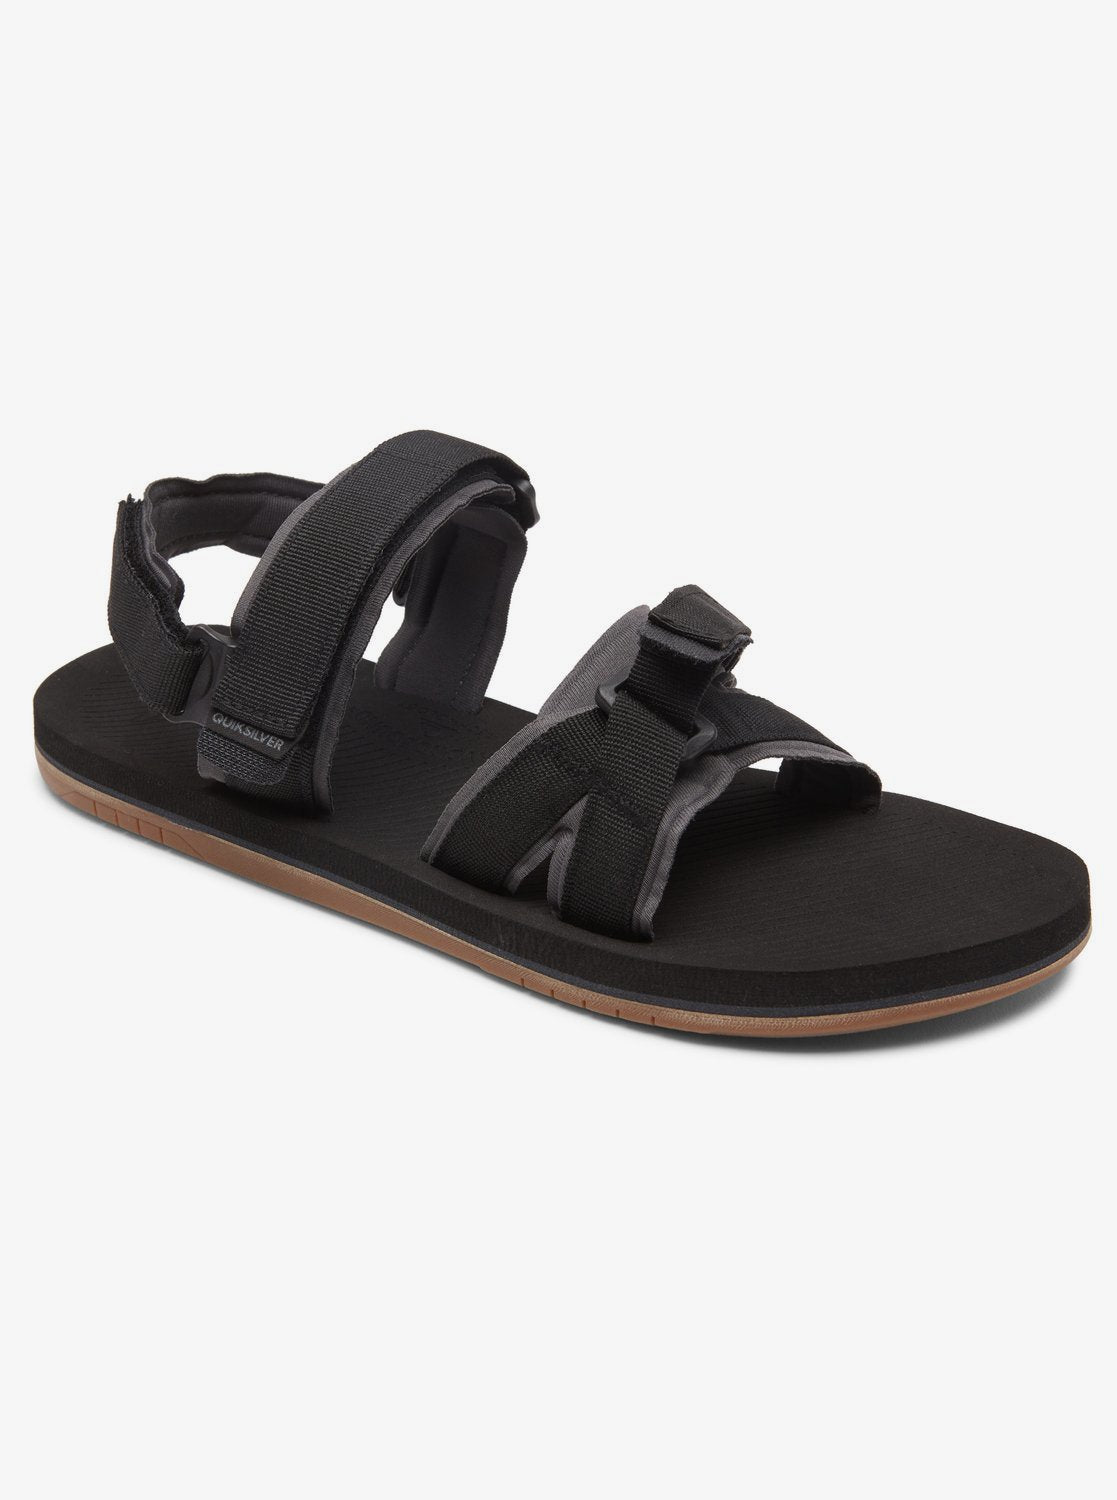 Quicksilver Caged Oasis II Sandal Black Grey Gray Brown Front